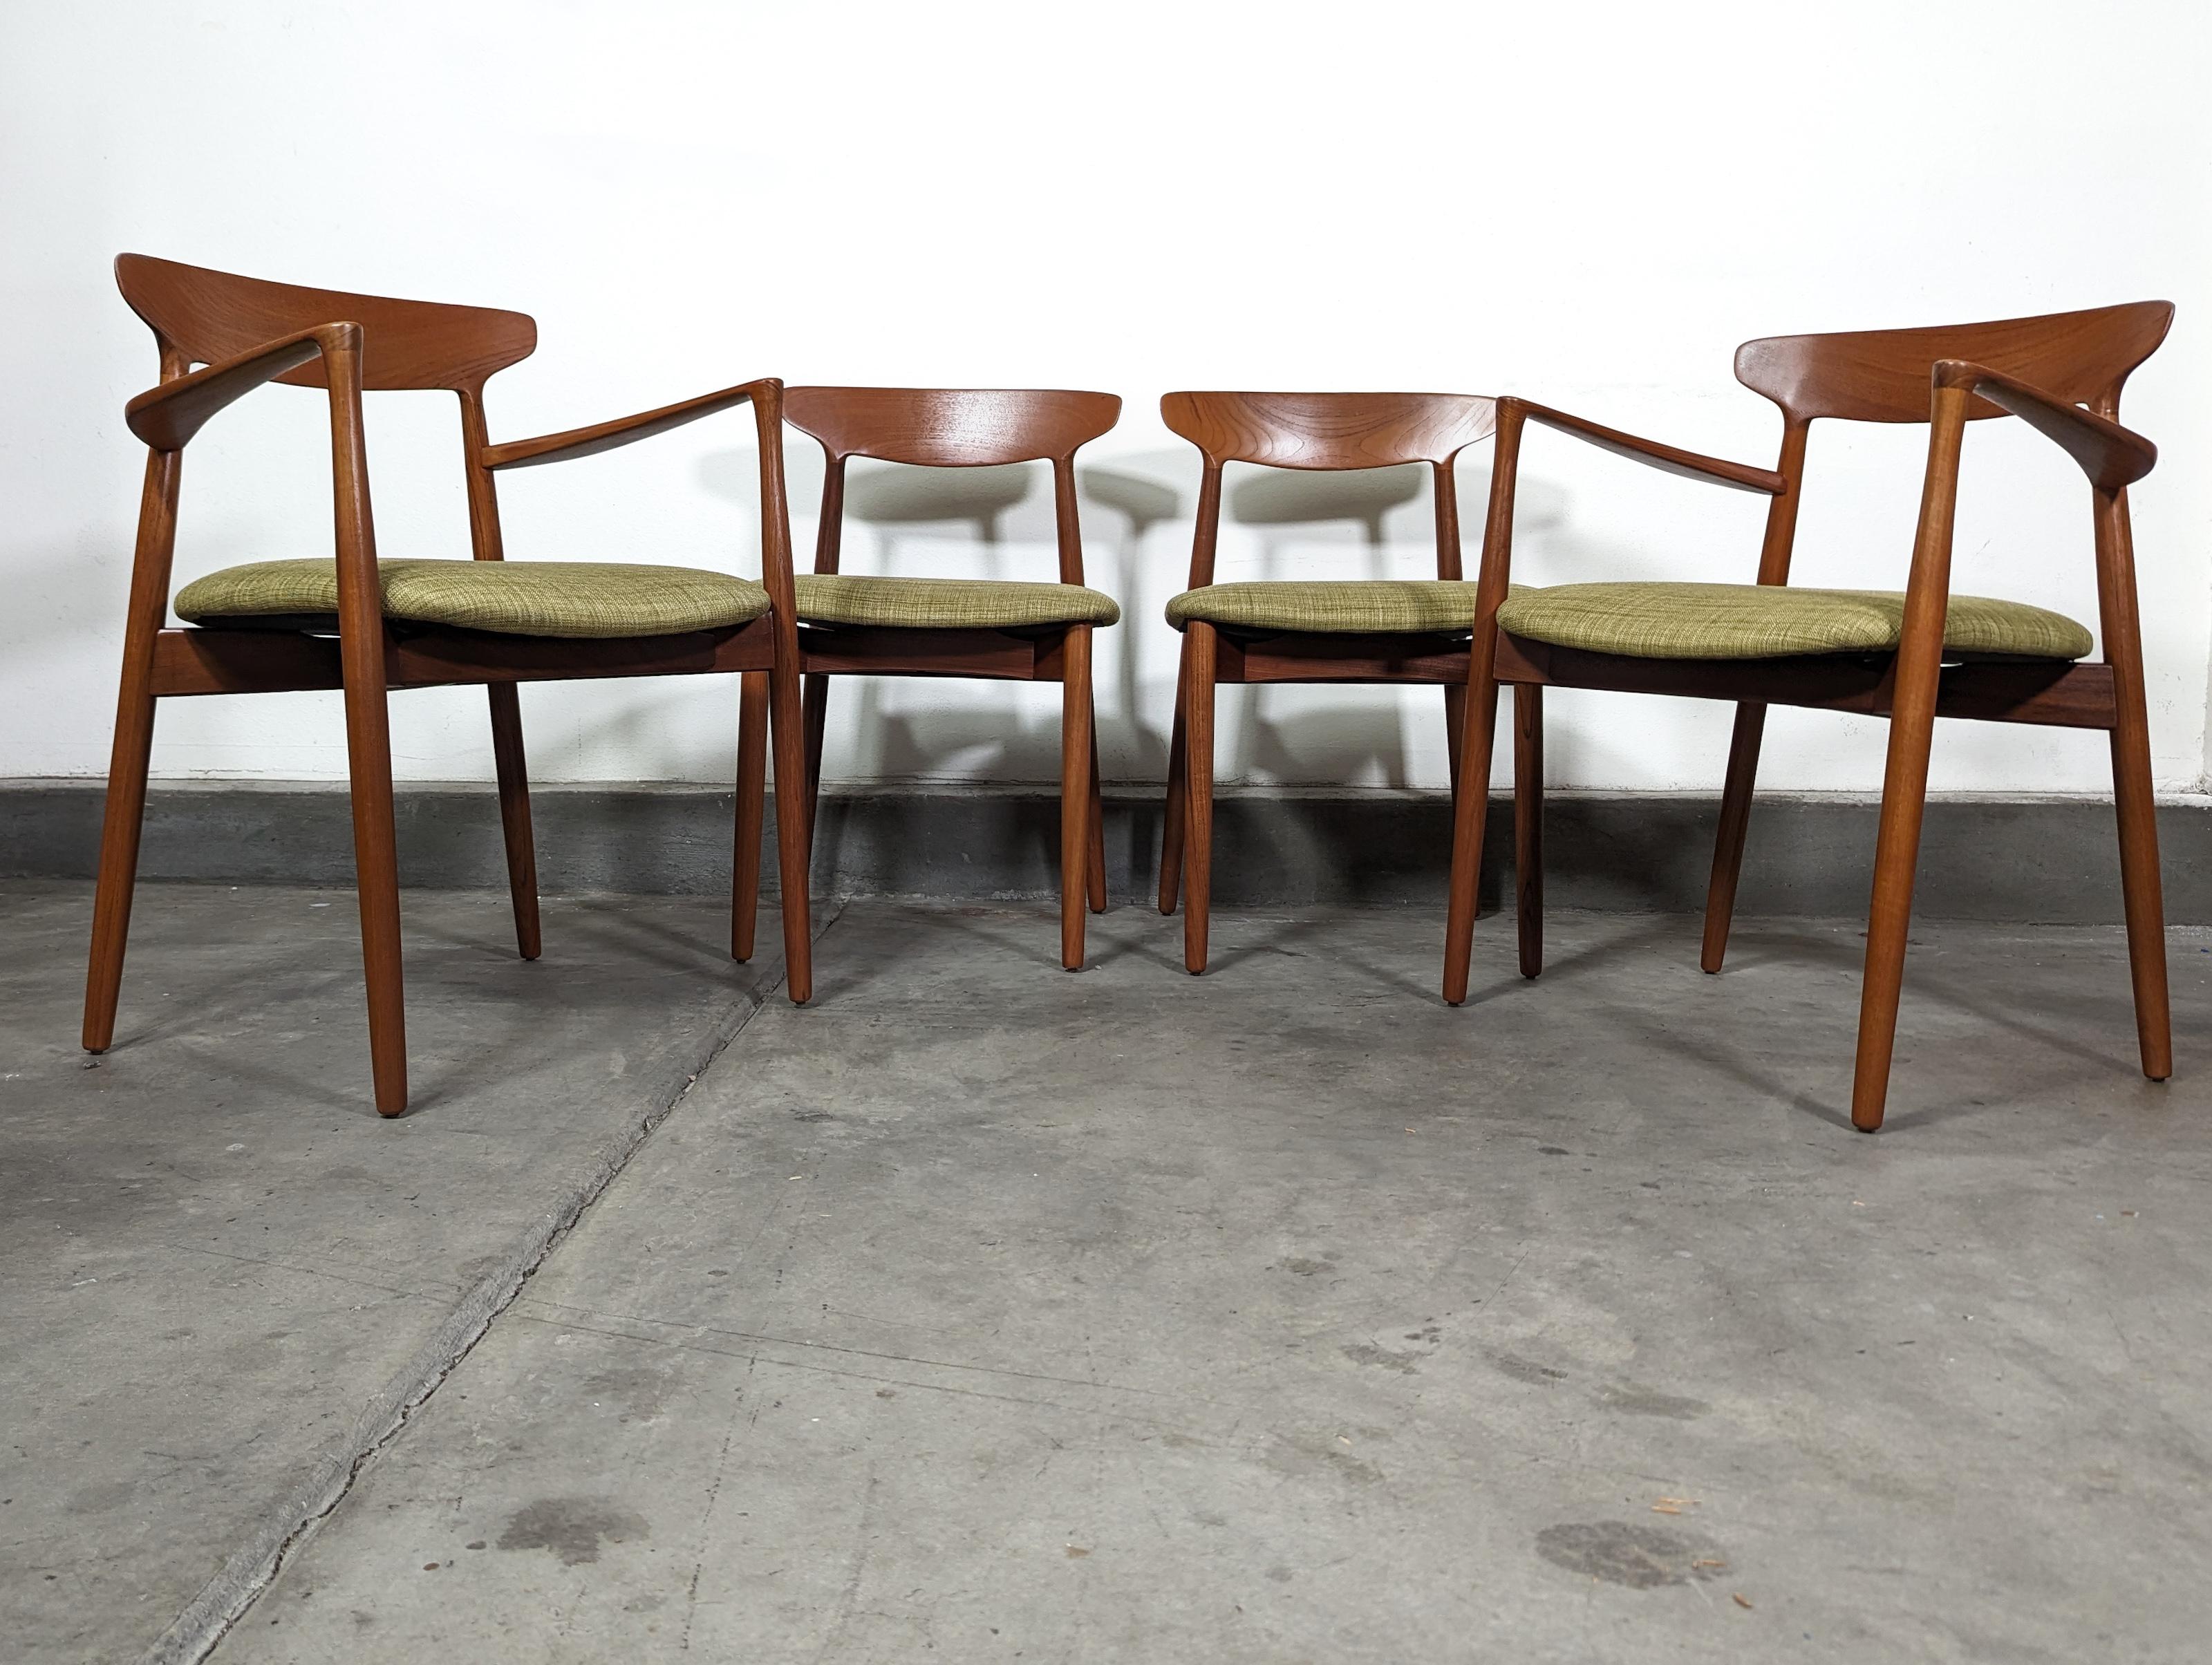 Presenting a remarkable set of four mid-century modern chairs, designed by the renowned furniture designer, Harry Østergaard for Randers Møbelfabrik in the 1960s. Masterfully constructed of solid teak, these iconic pieces exude timeless elegance and